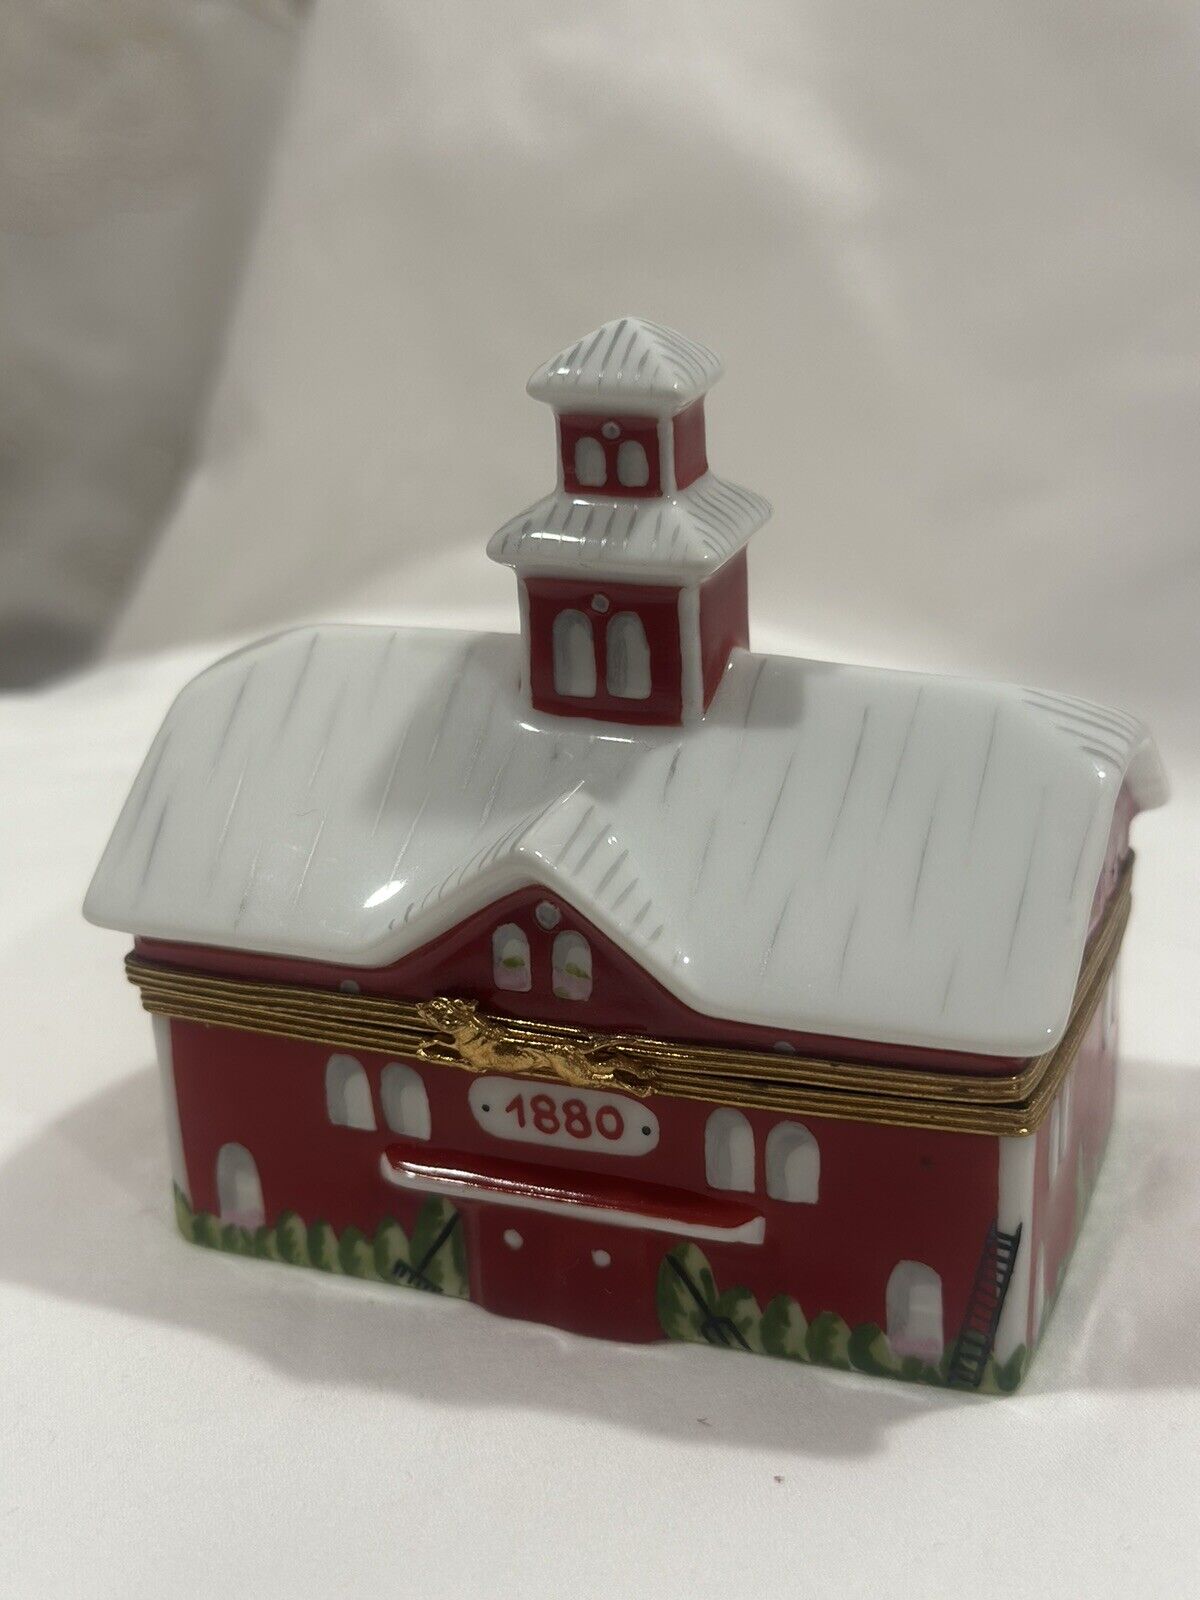 Big Red Barn with Cow Limoges Box Porcelain Figurine